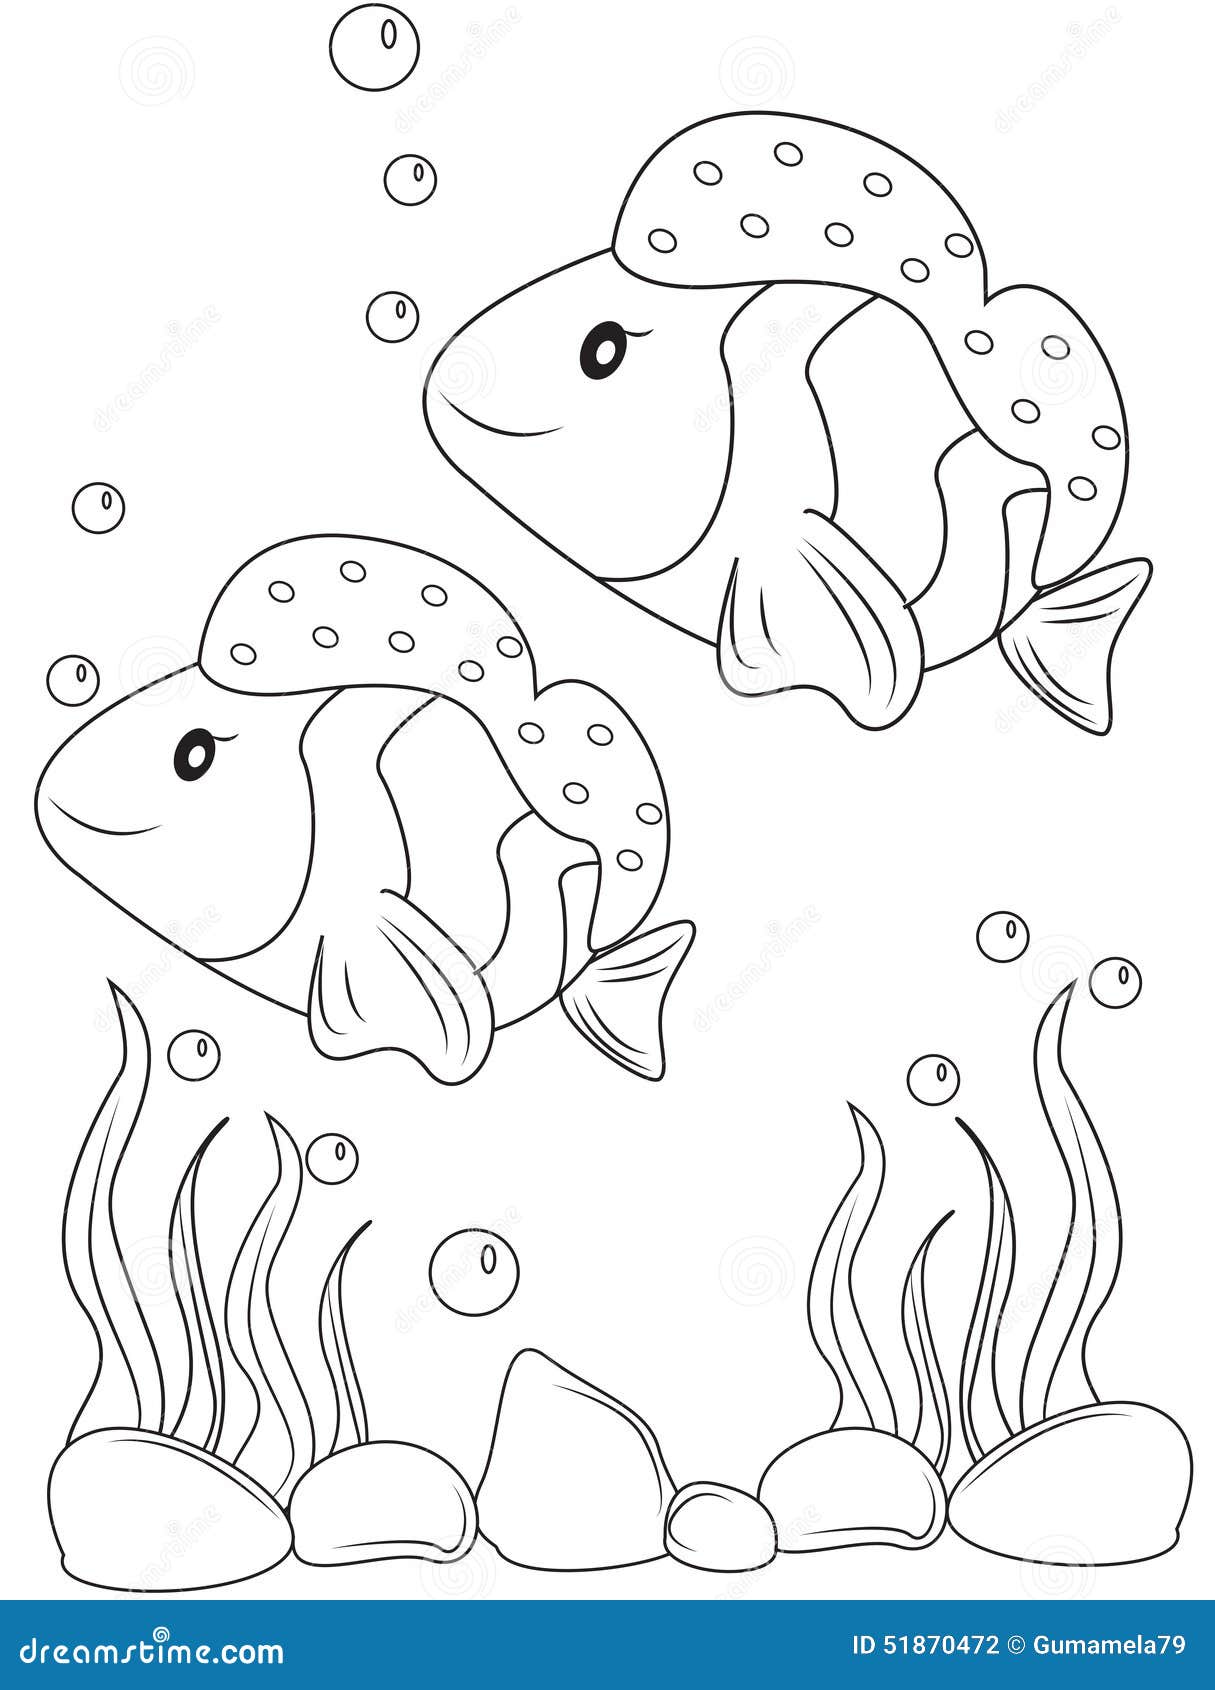 Fish Coloring Page Stock Illustration - Image: 51870472